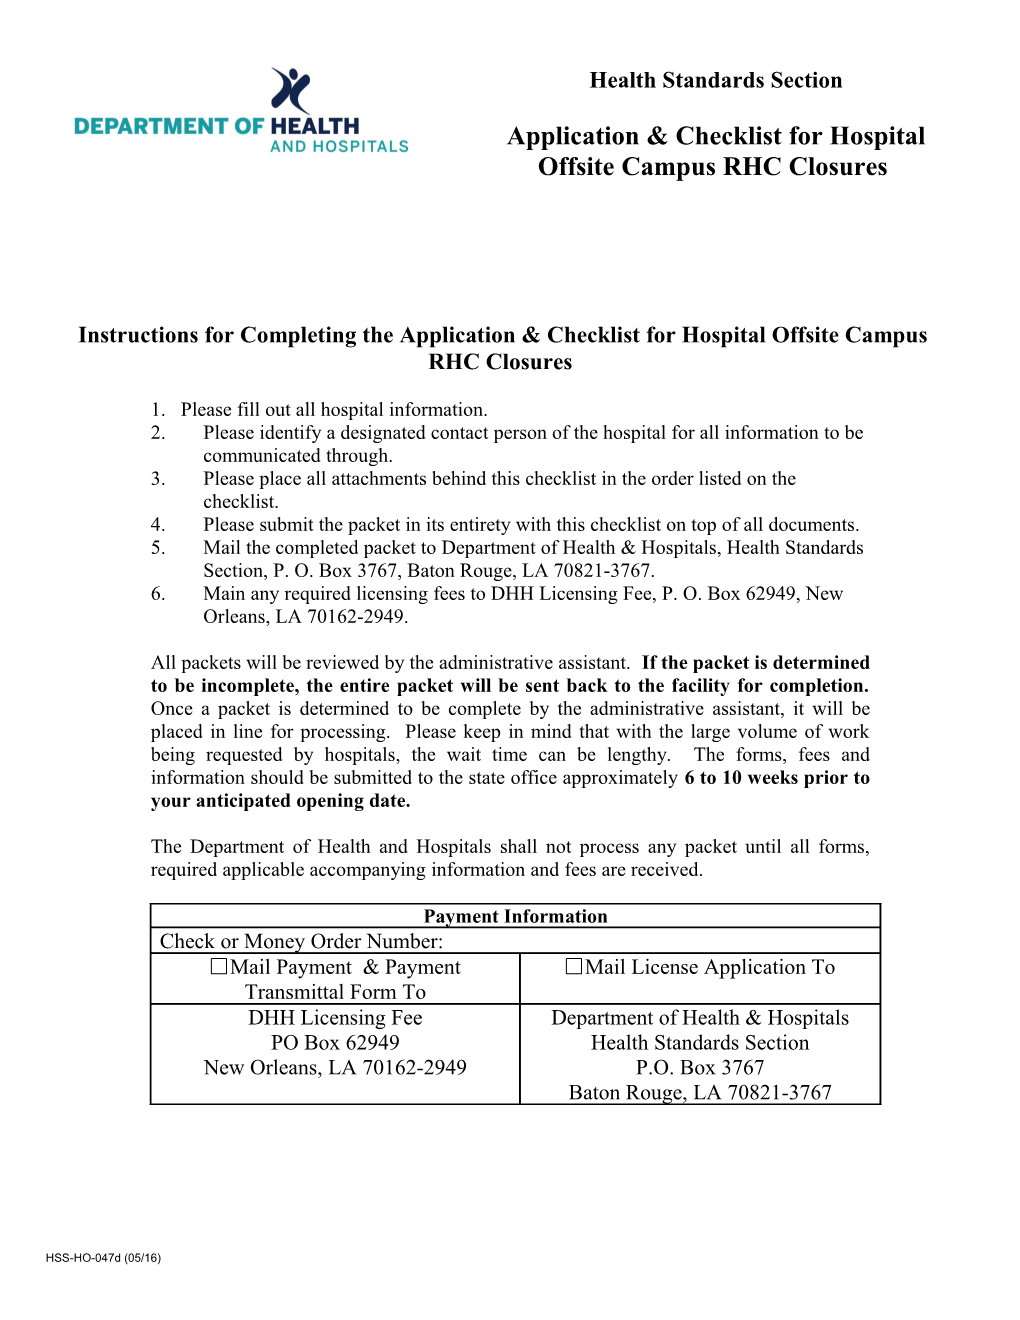 Instructions for Completing the Application & Checklist for Hospitaloffsite Campusrhc Closures